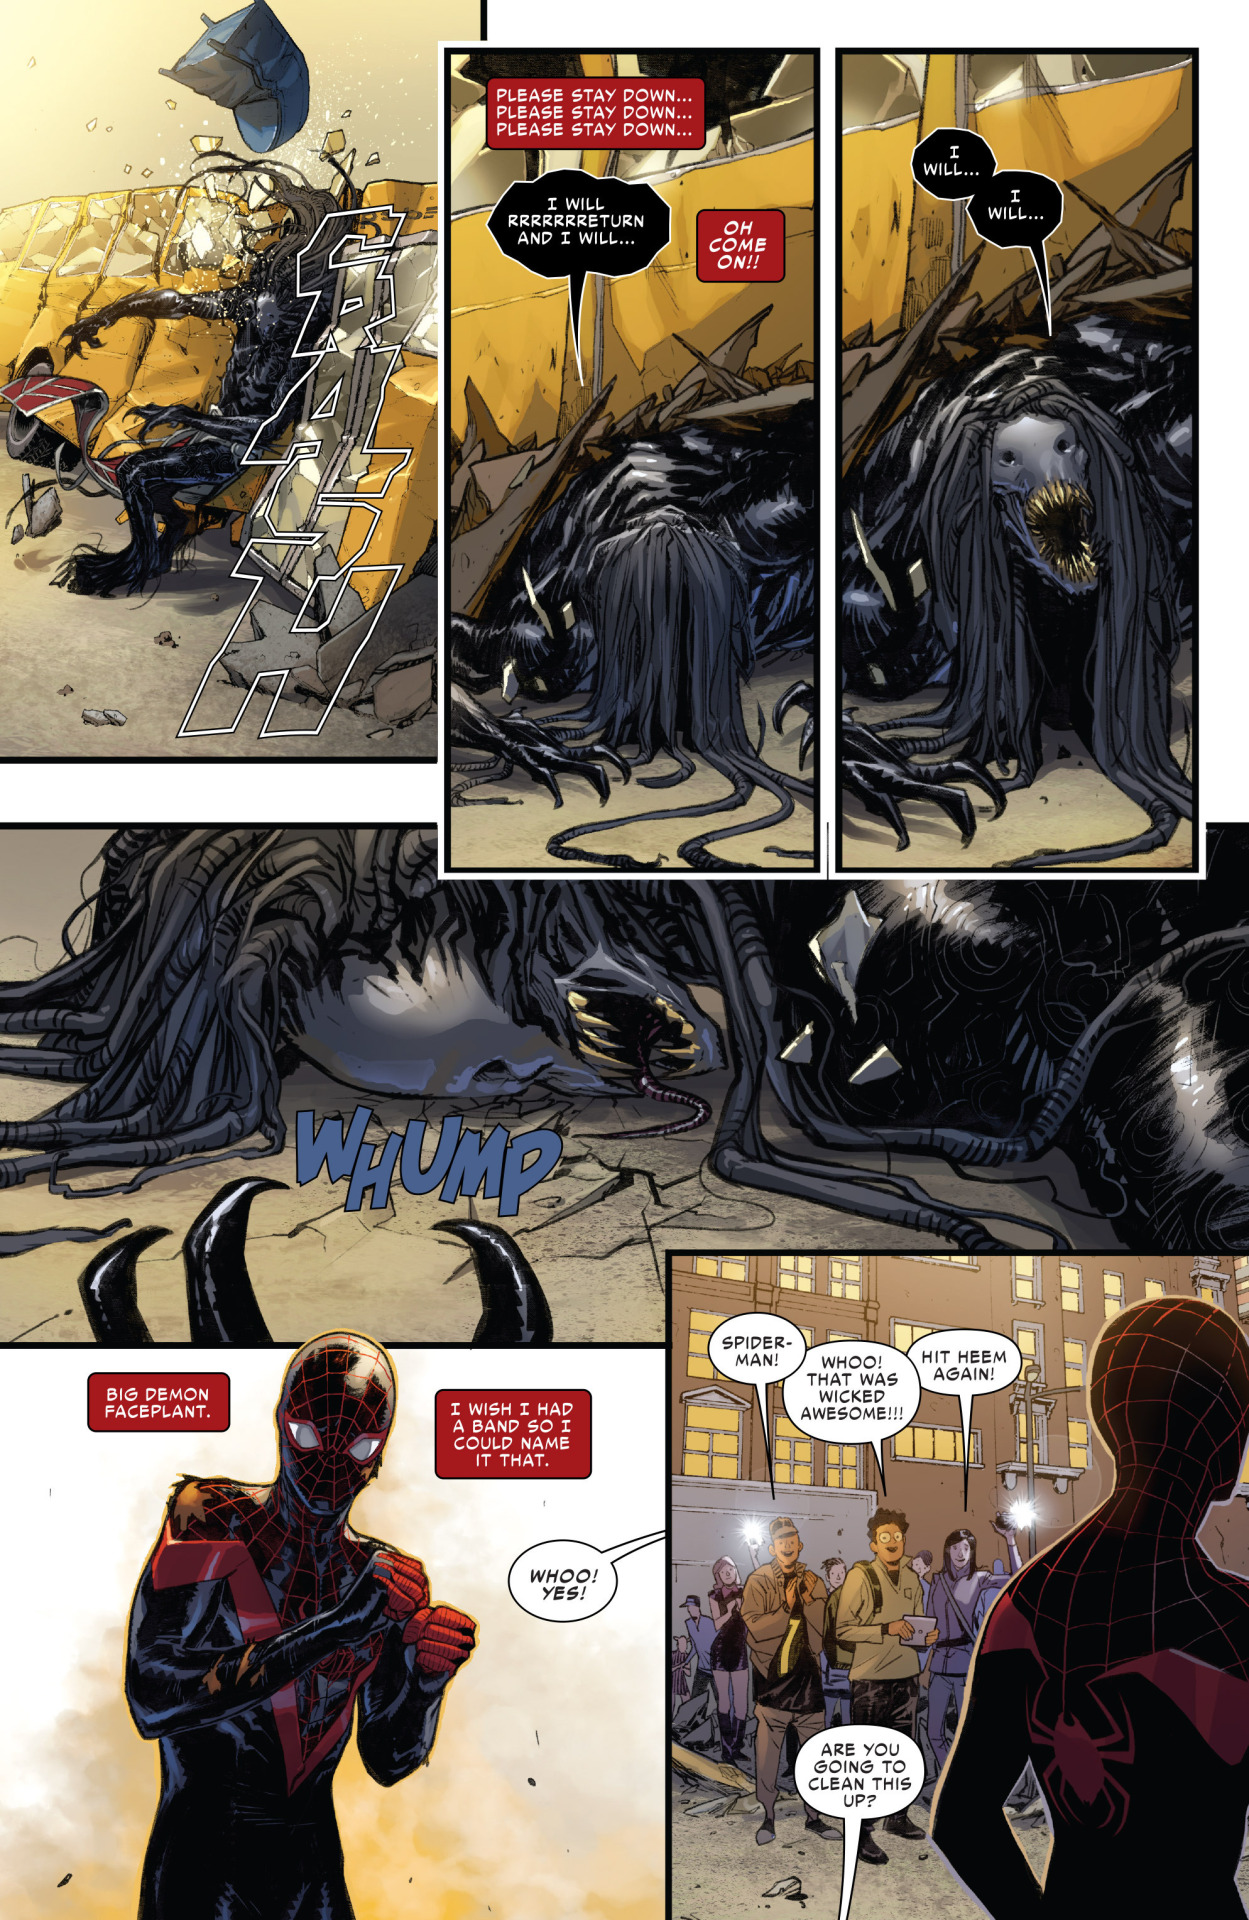 Blackheart is defeated by Miles Morales - Spider-Man: Miles Morales Vol. 1